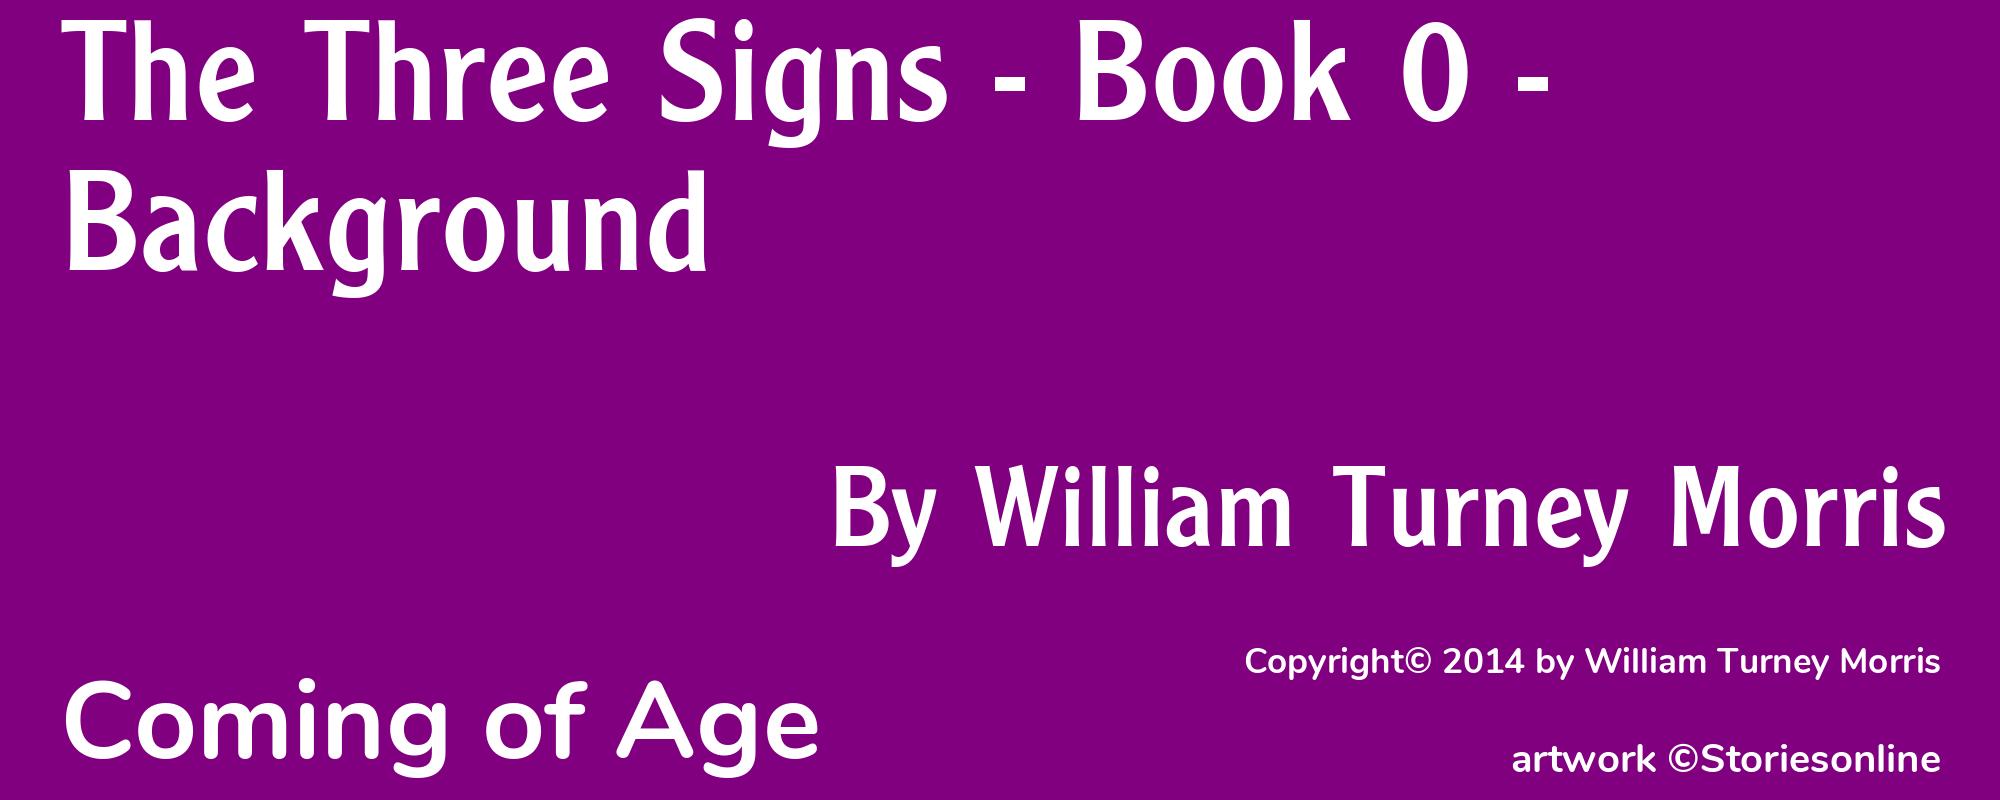 The Three Signs - Book 0 - Background - Cover